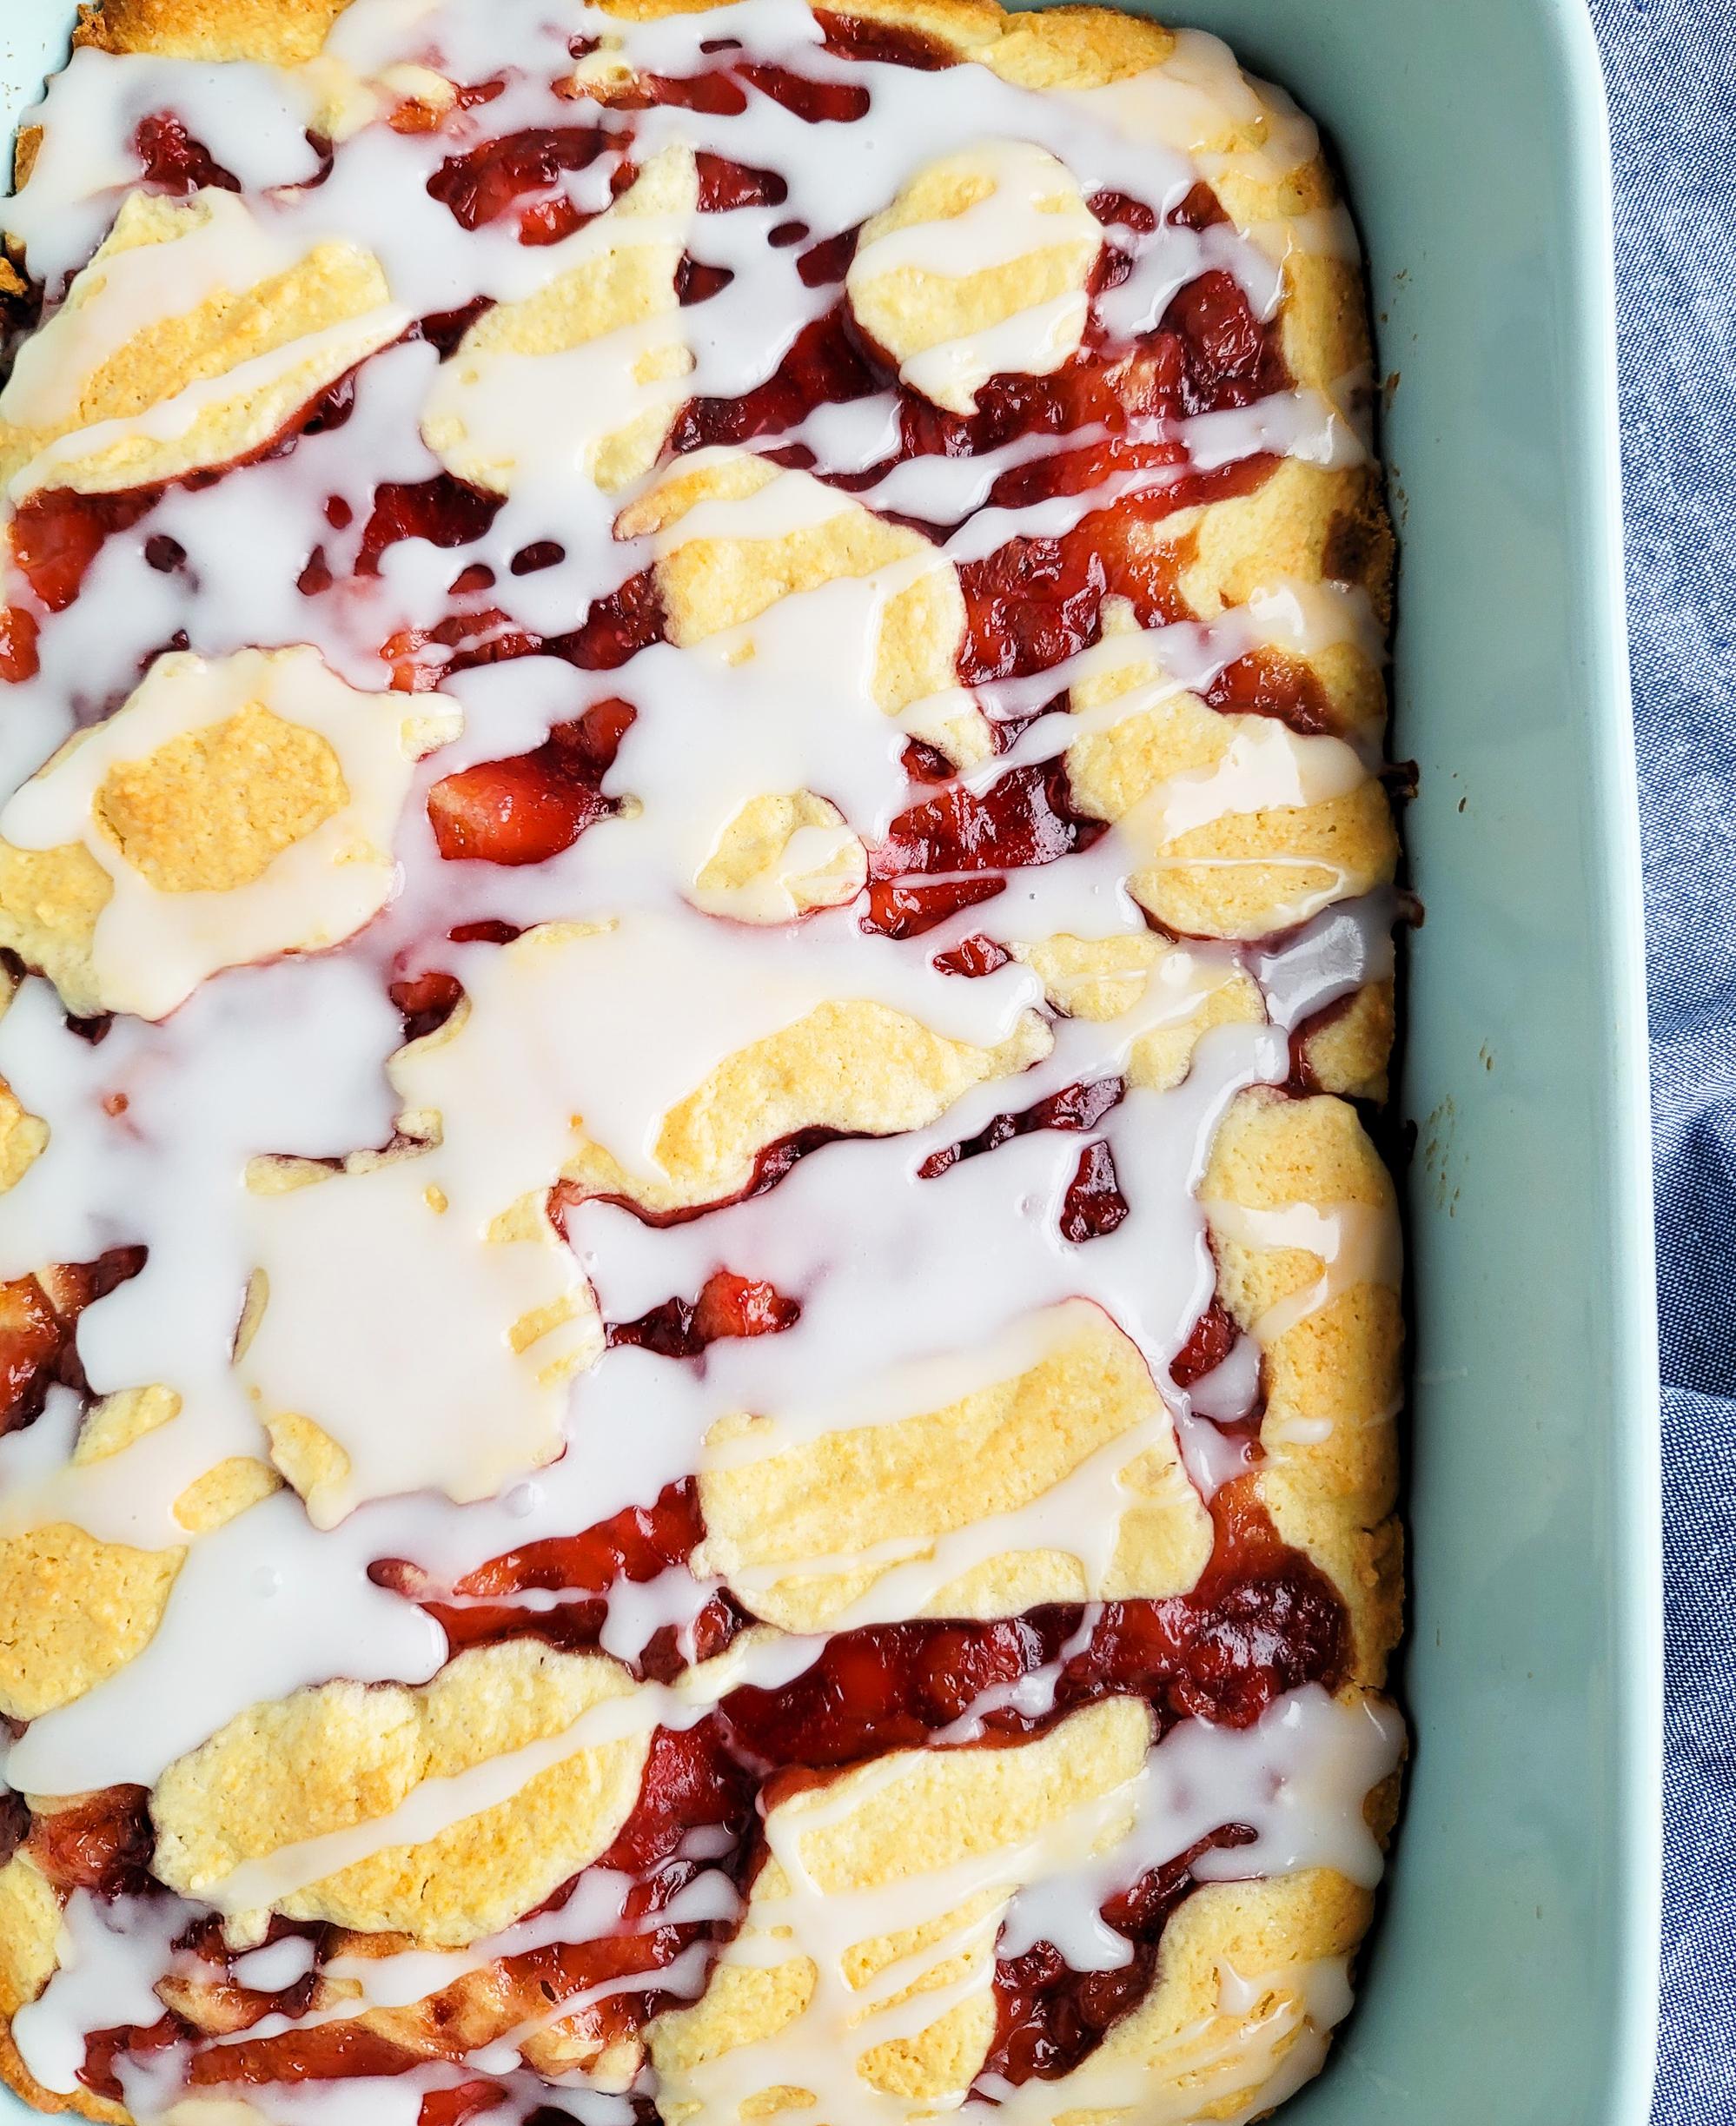  Dig in to this moist and flavorful Cherry Swirl Coffee Cake.